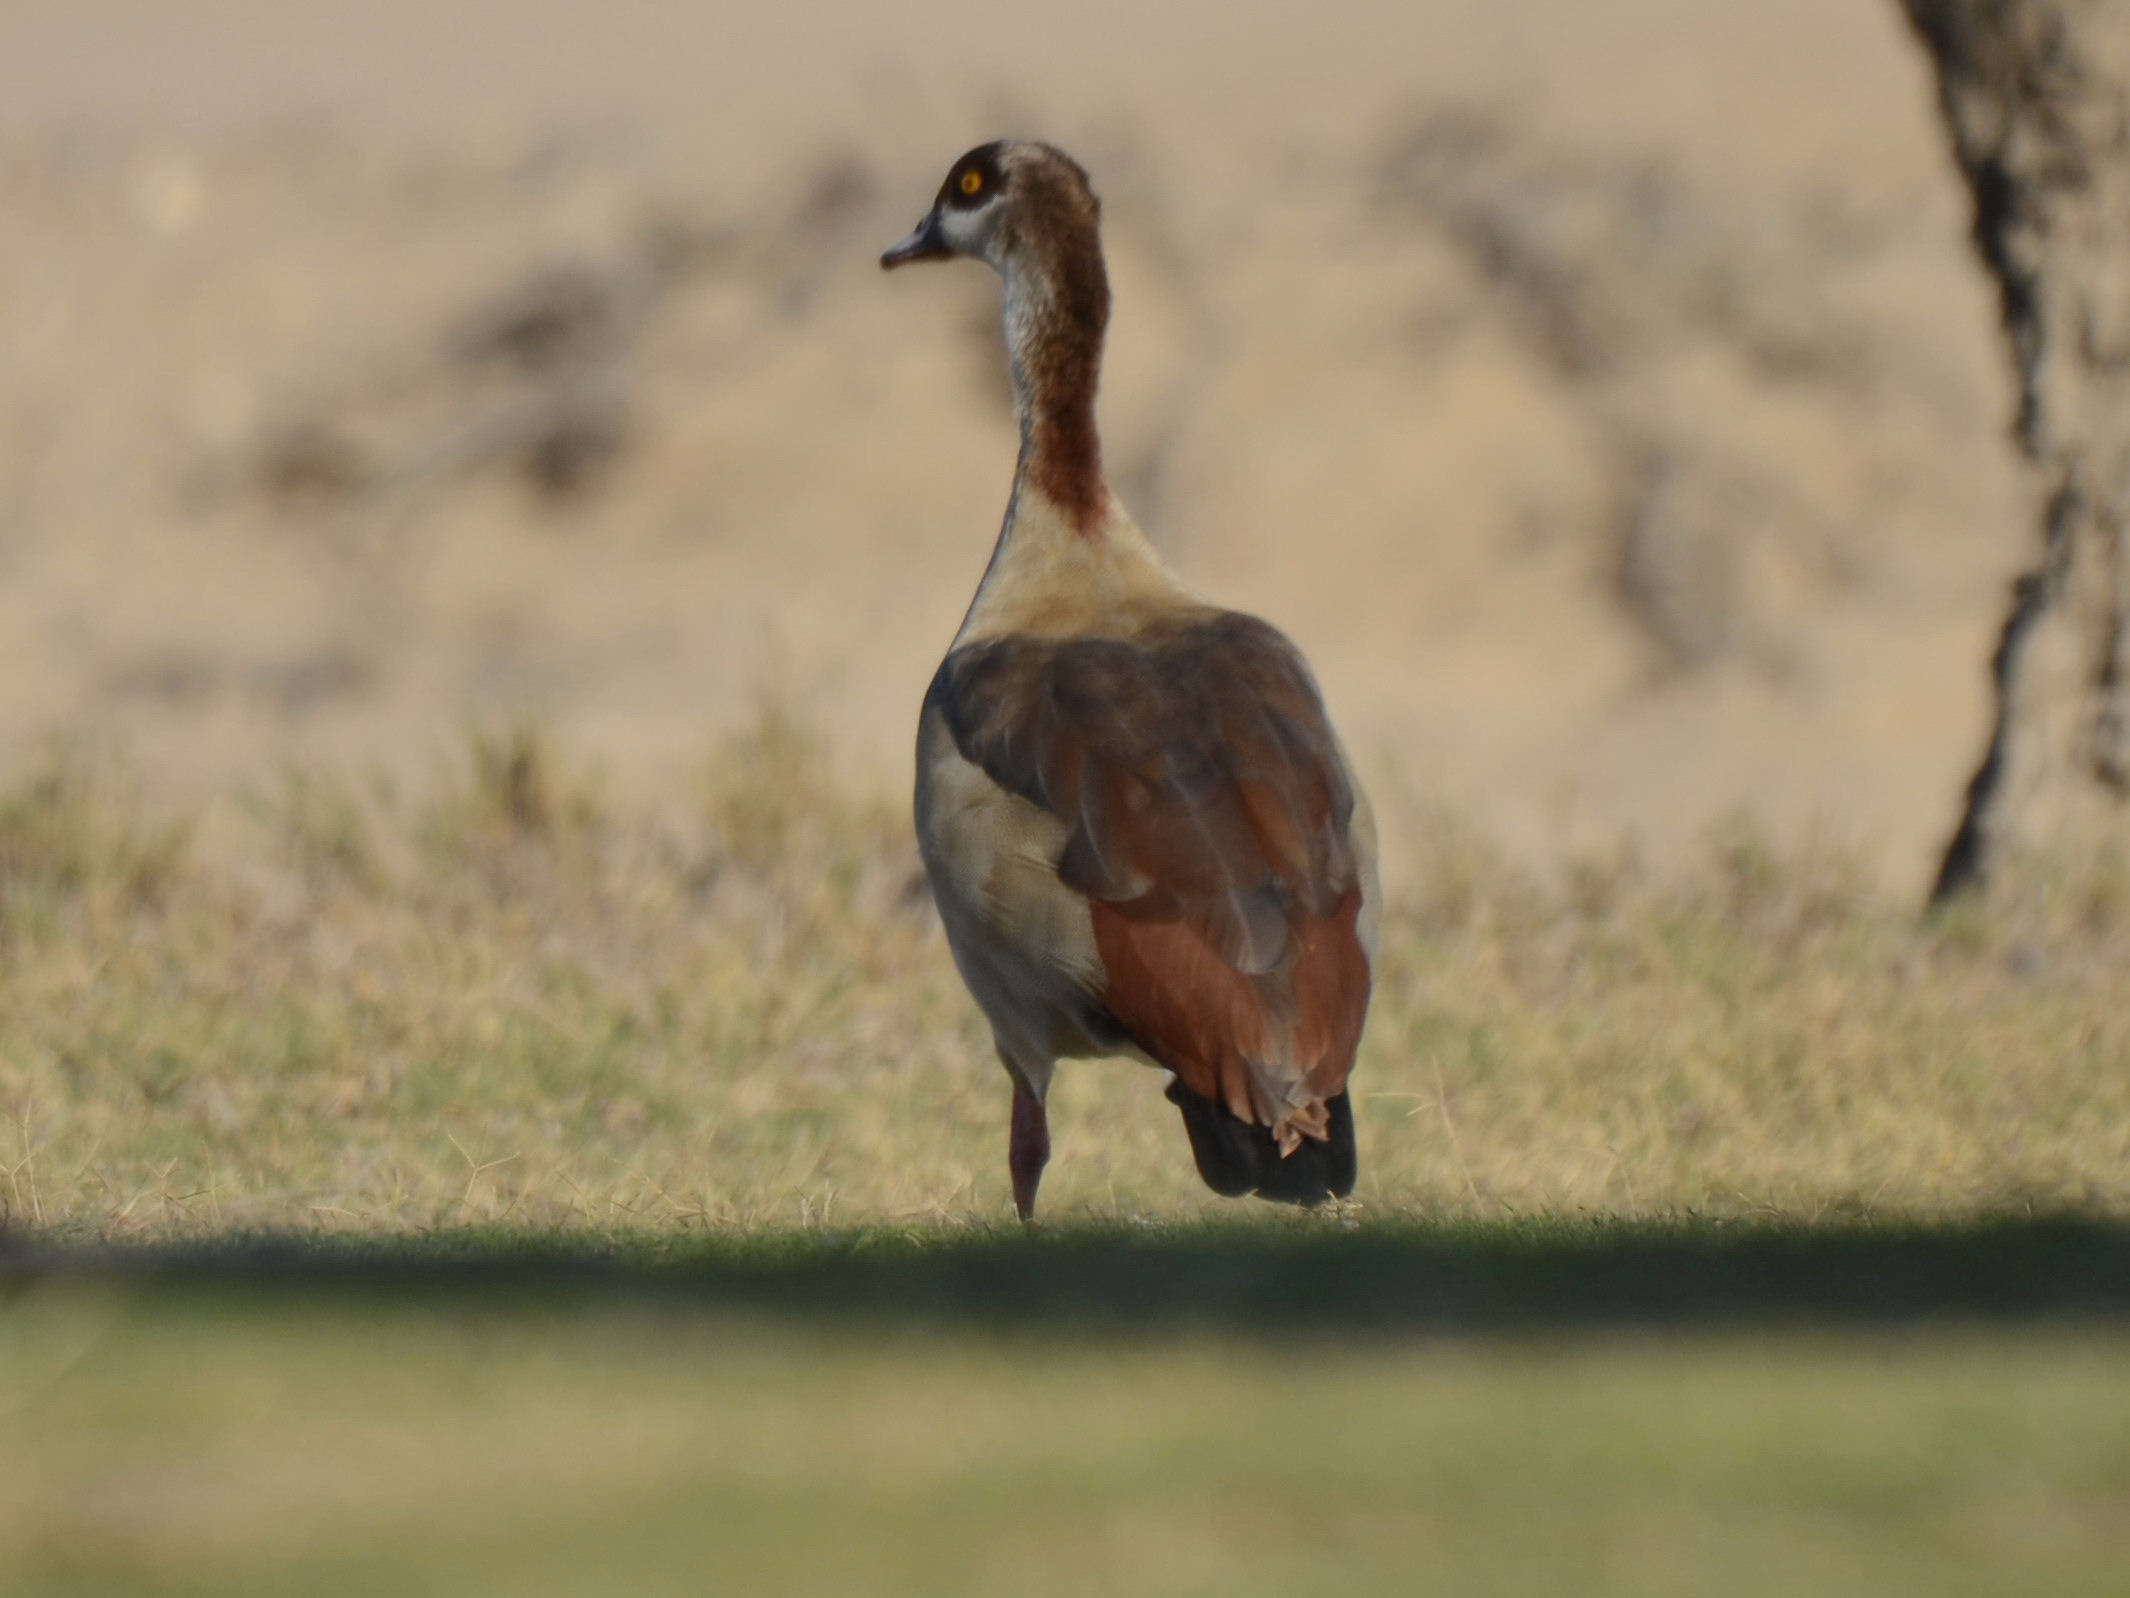 Click picture to see more Egyptian Geese.